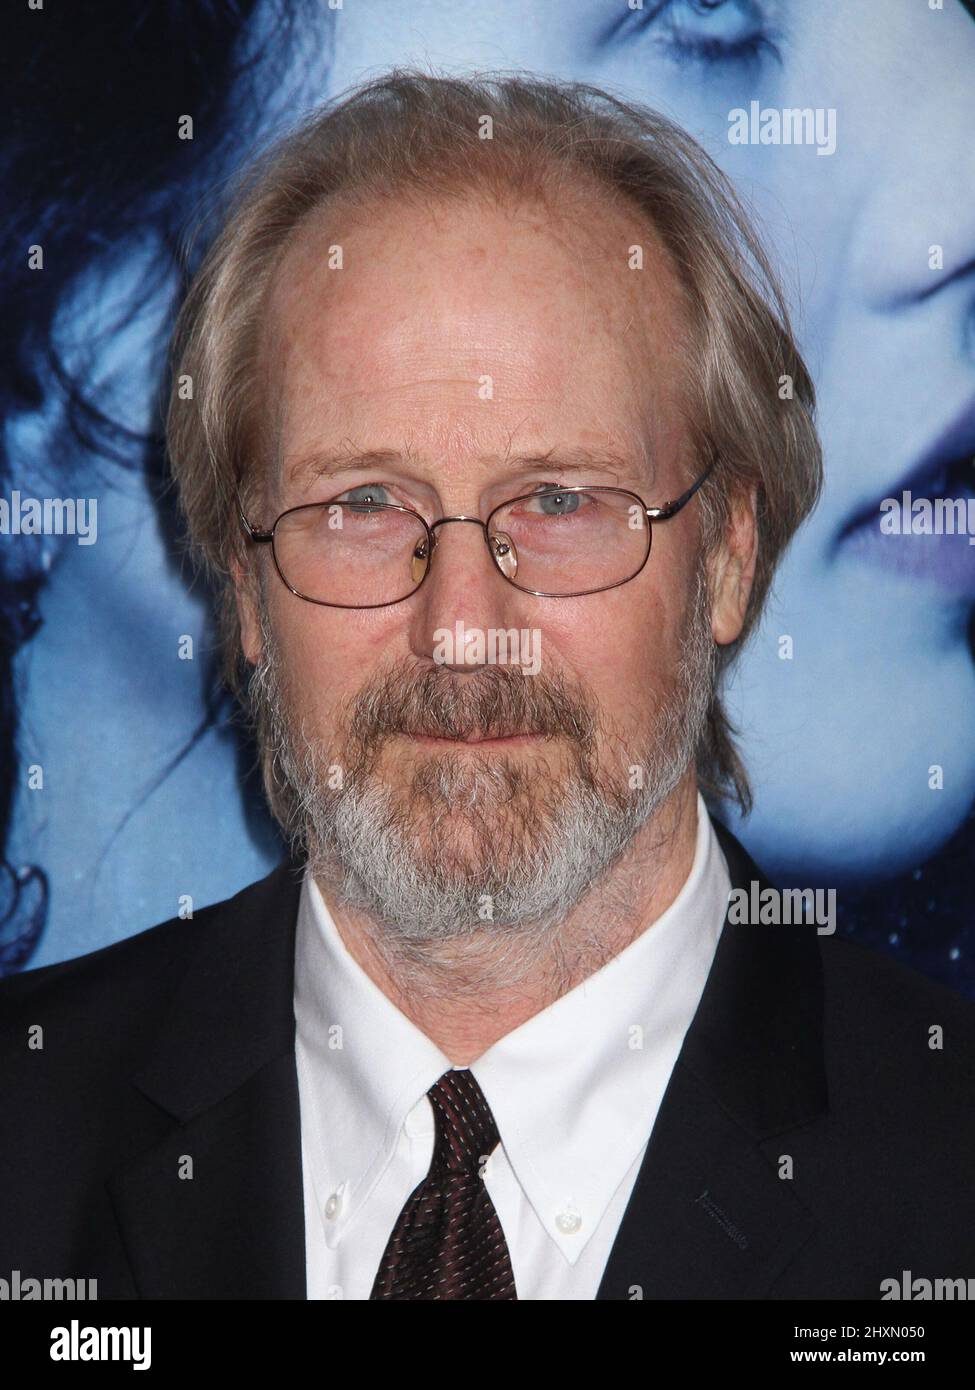 WILLIAM HURT (March 20, 1950 - March 13, 2022) was an American actor who made it big in the 1981 neo-noir film 'Body Heat'. He garnered three consecutive nominations for the Academy Award for Best Actor, for 'Kiss of the Spider Woman' (1985), 'Children of a Lesser God' (1986), and 'Broadcast News' (1987), winning for the first of these. After a variety of character roles in the following decade, Hurt earned his fourth Academy Award nomination for his supporting performance in the crime thriller 'A History of Violence' (2005). It was announced in May 2018 that Hurt had terminal prostate cancer. Stock Photo